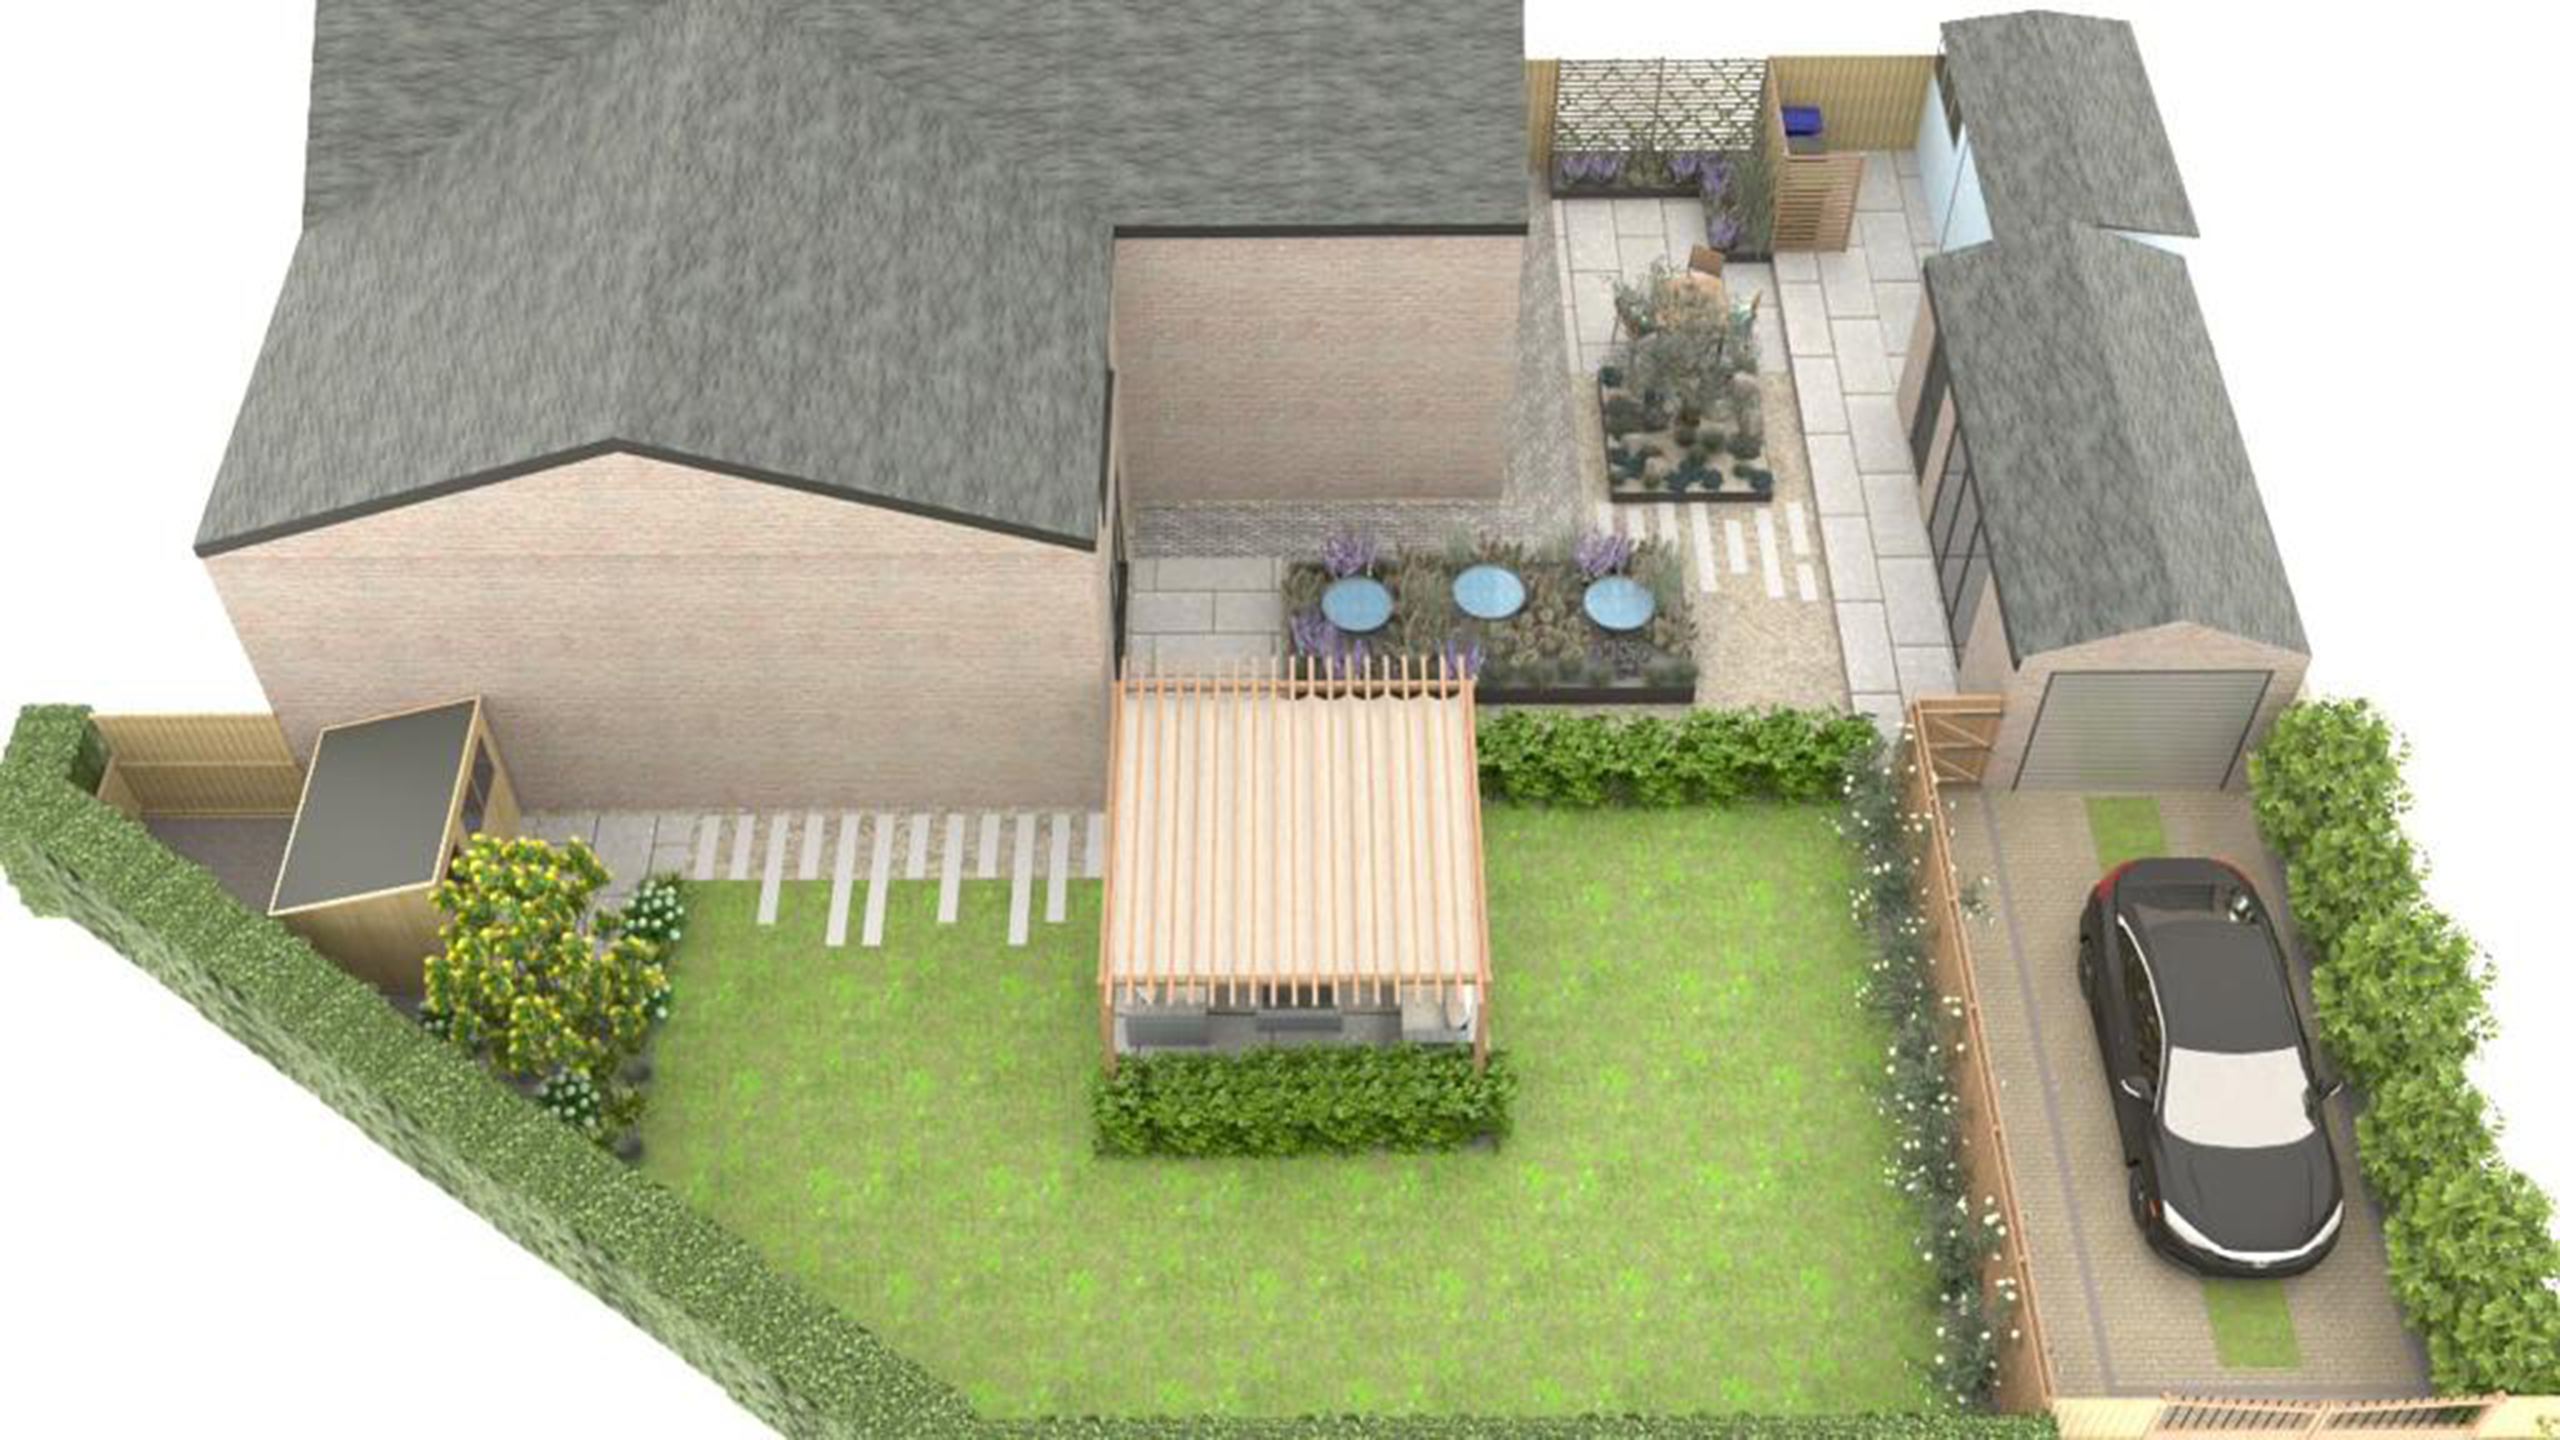 Full redesign and transformation of a garden – Landscaping Cambridge 5